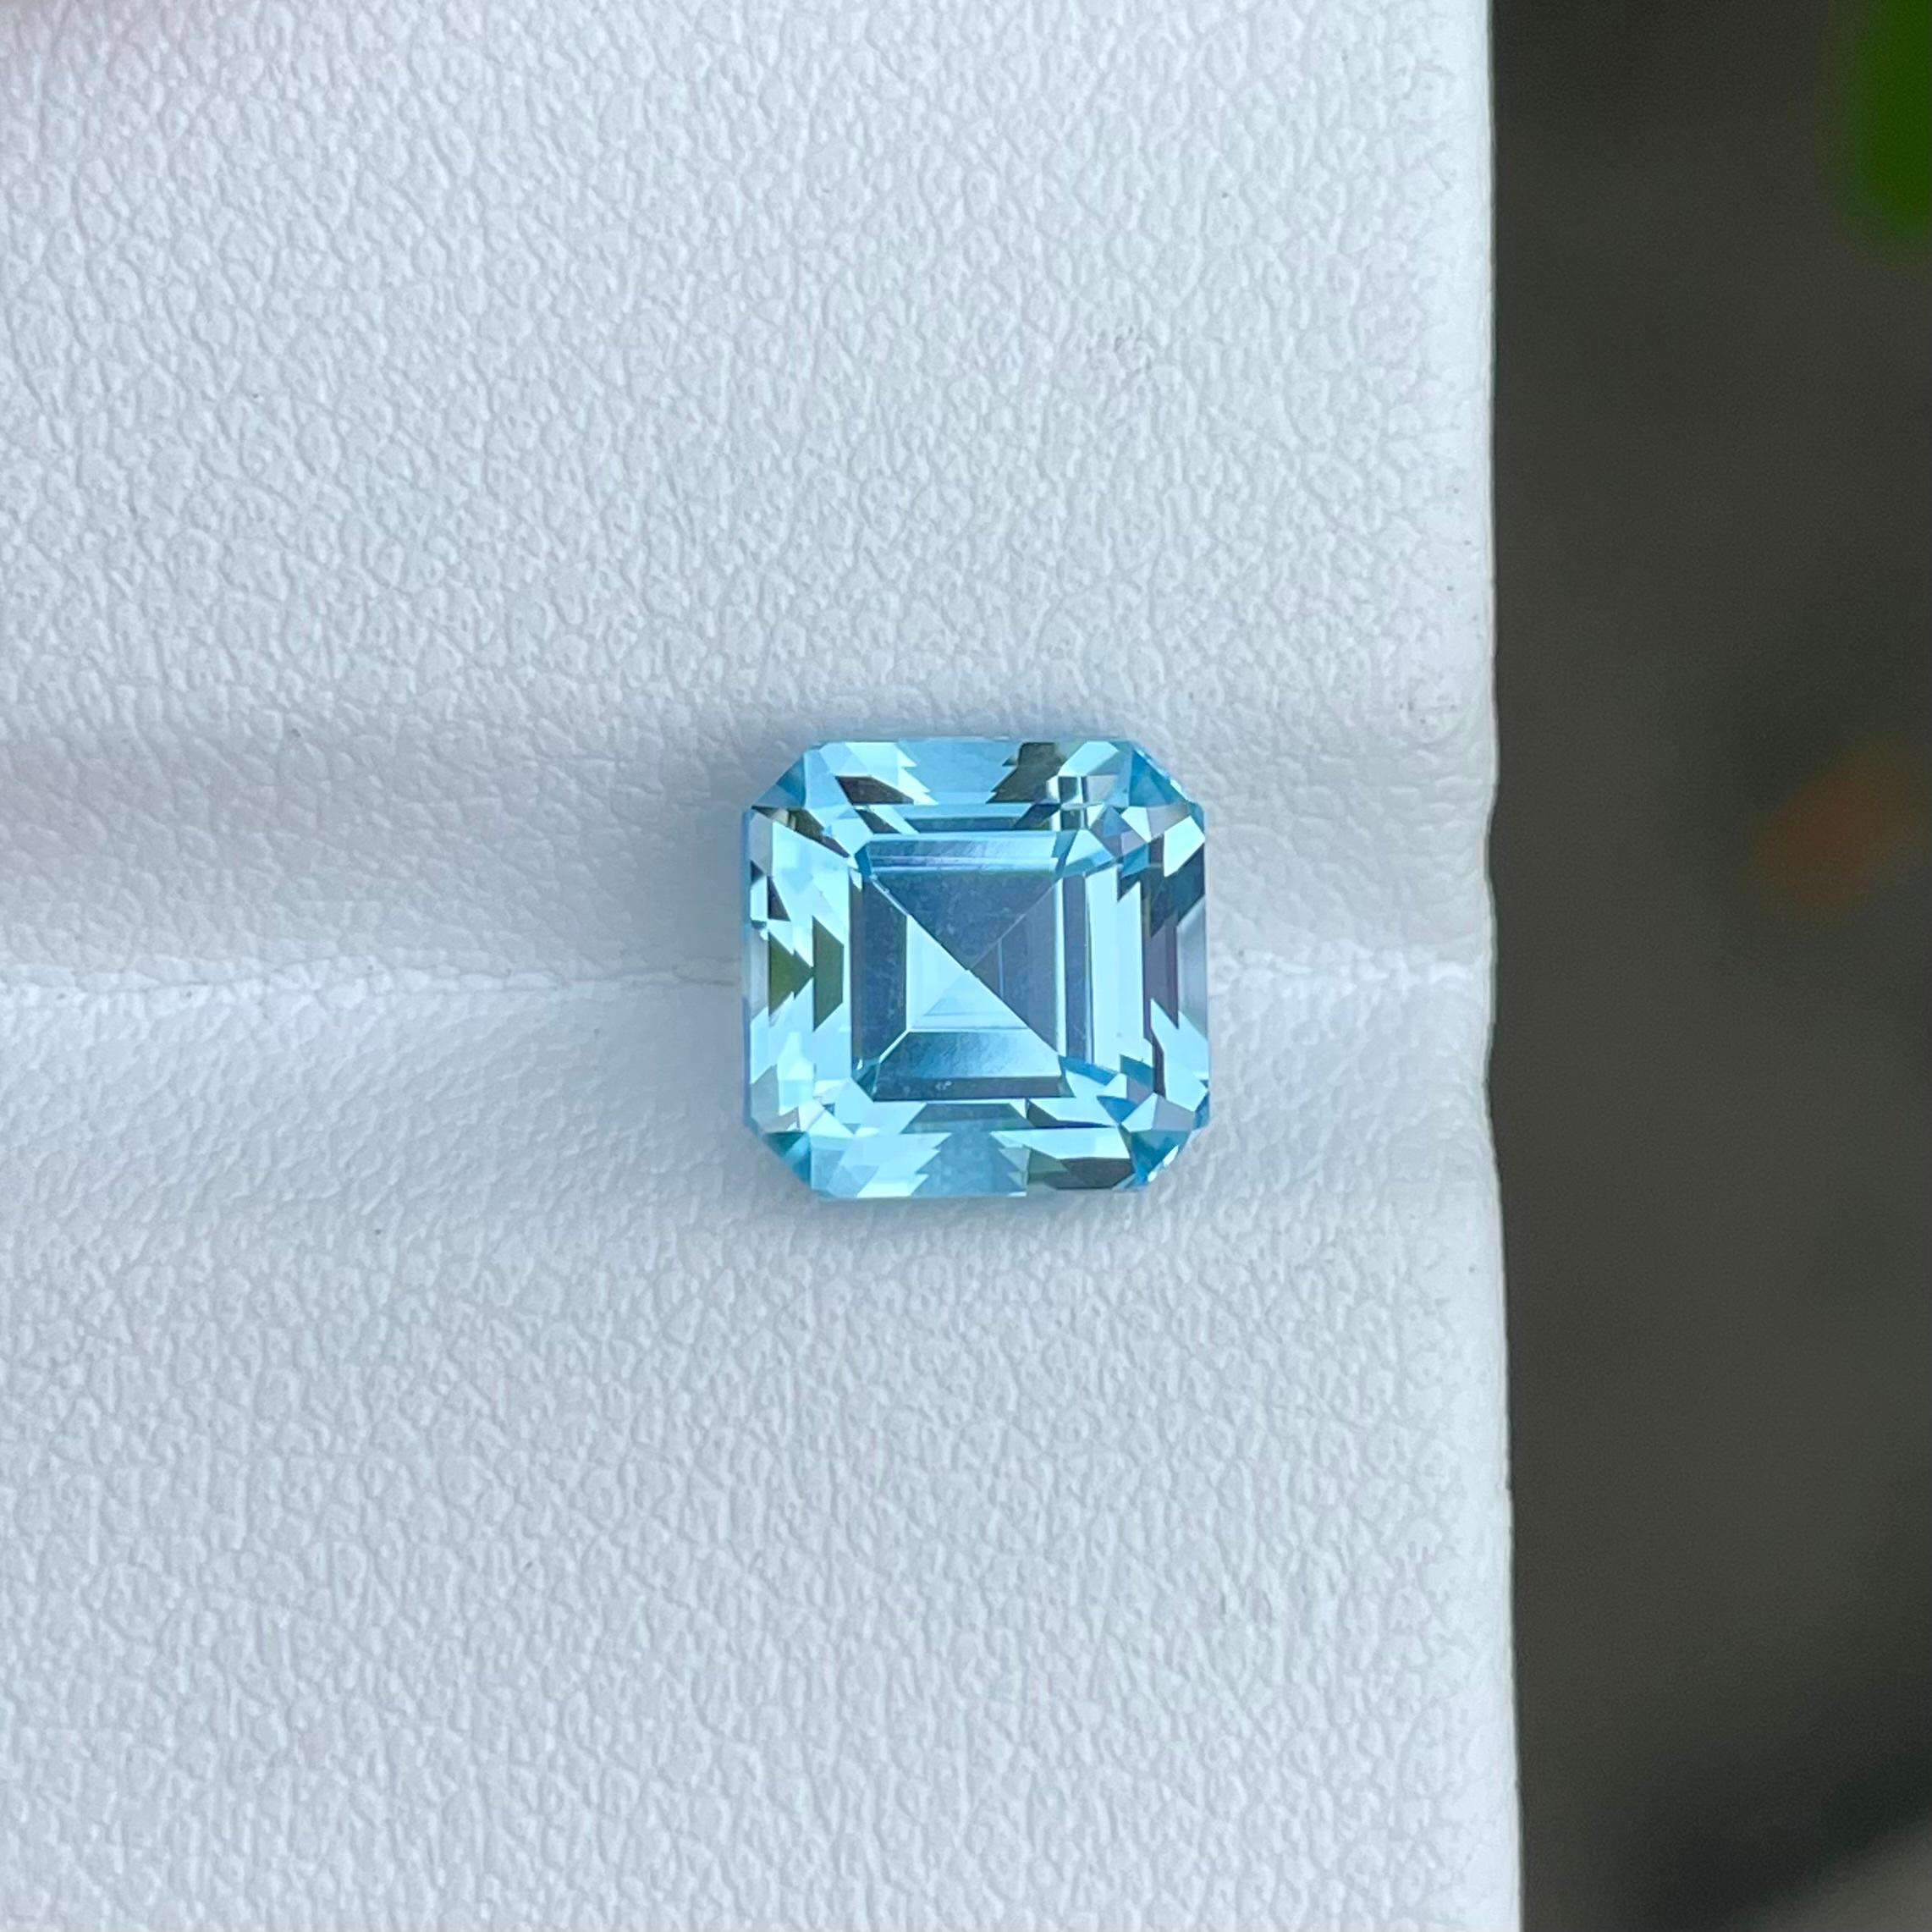 Weight 4.60 carats 
Dimensions 8.35 x 8.35 x 7.41 mm
Treatment Heated 
Origin Madagascar 
Clarity Eye Clean 
Shape Octagon 
Cut Asscher



Elevate your jewelry collection with the timeless beauty of this natural Swiss Blue Topaz gemstone. At an